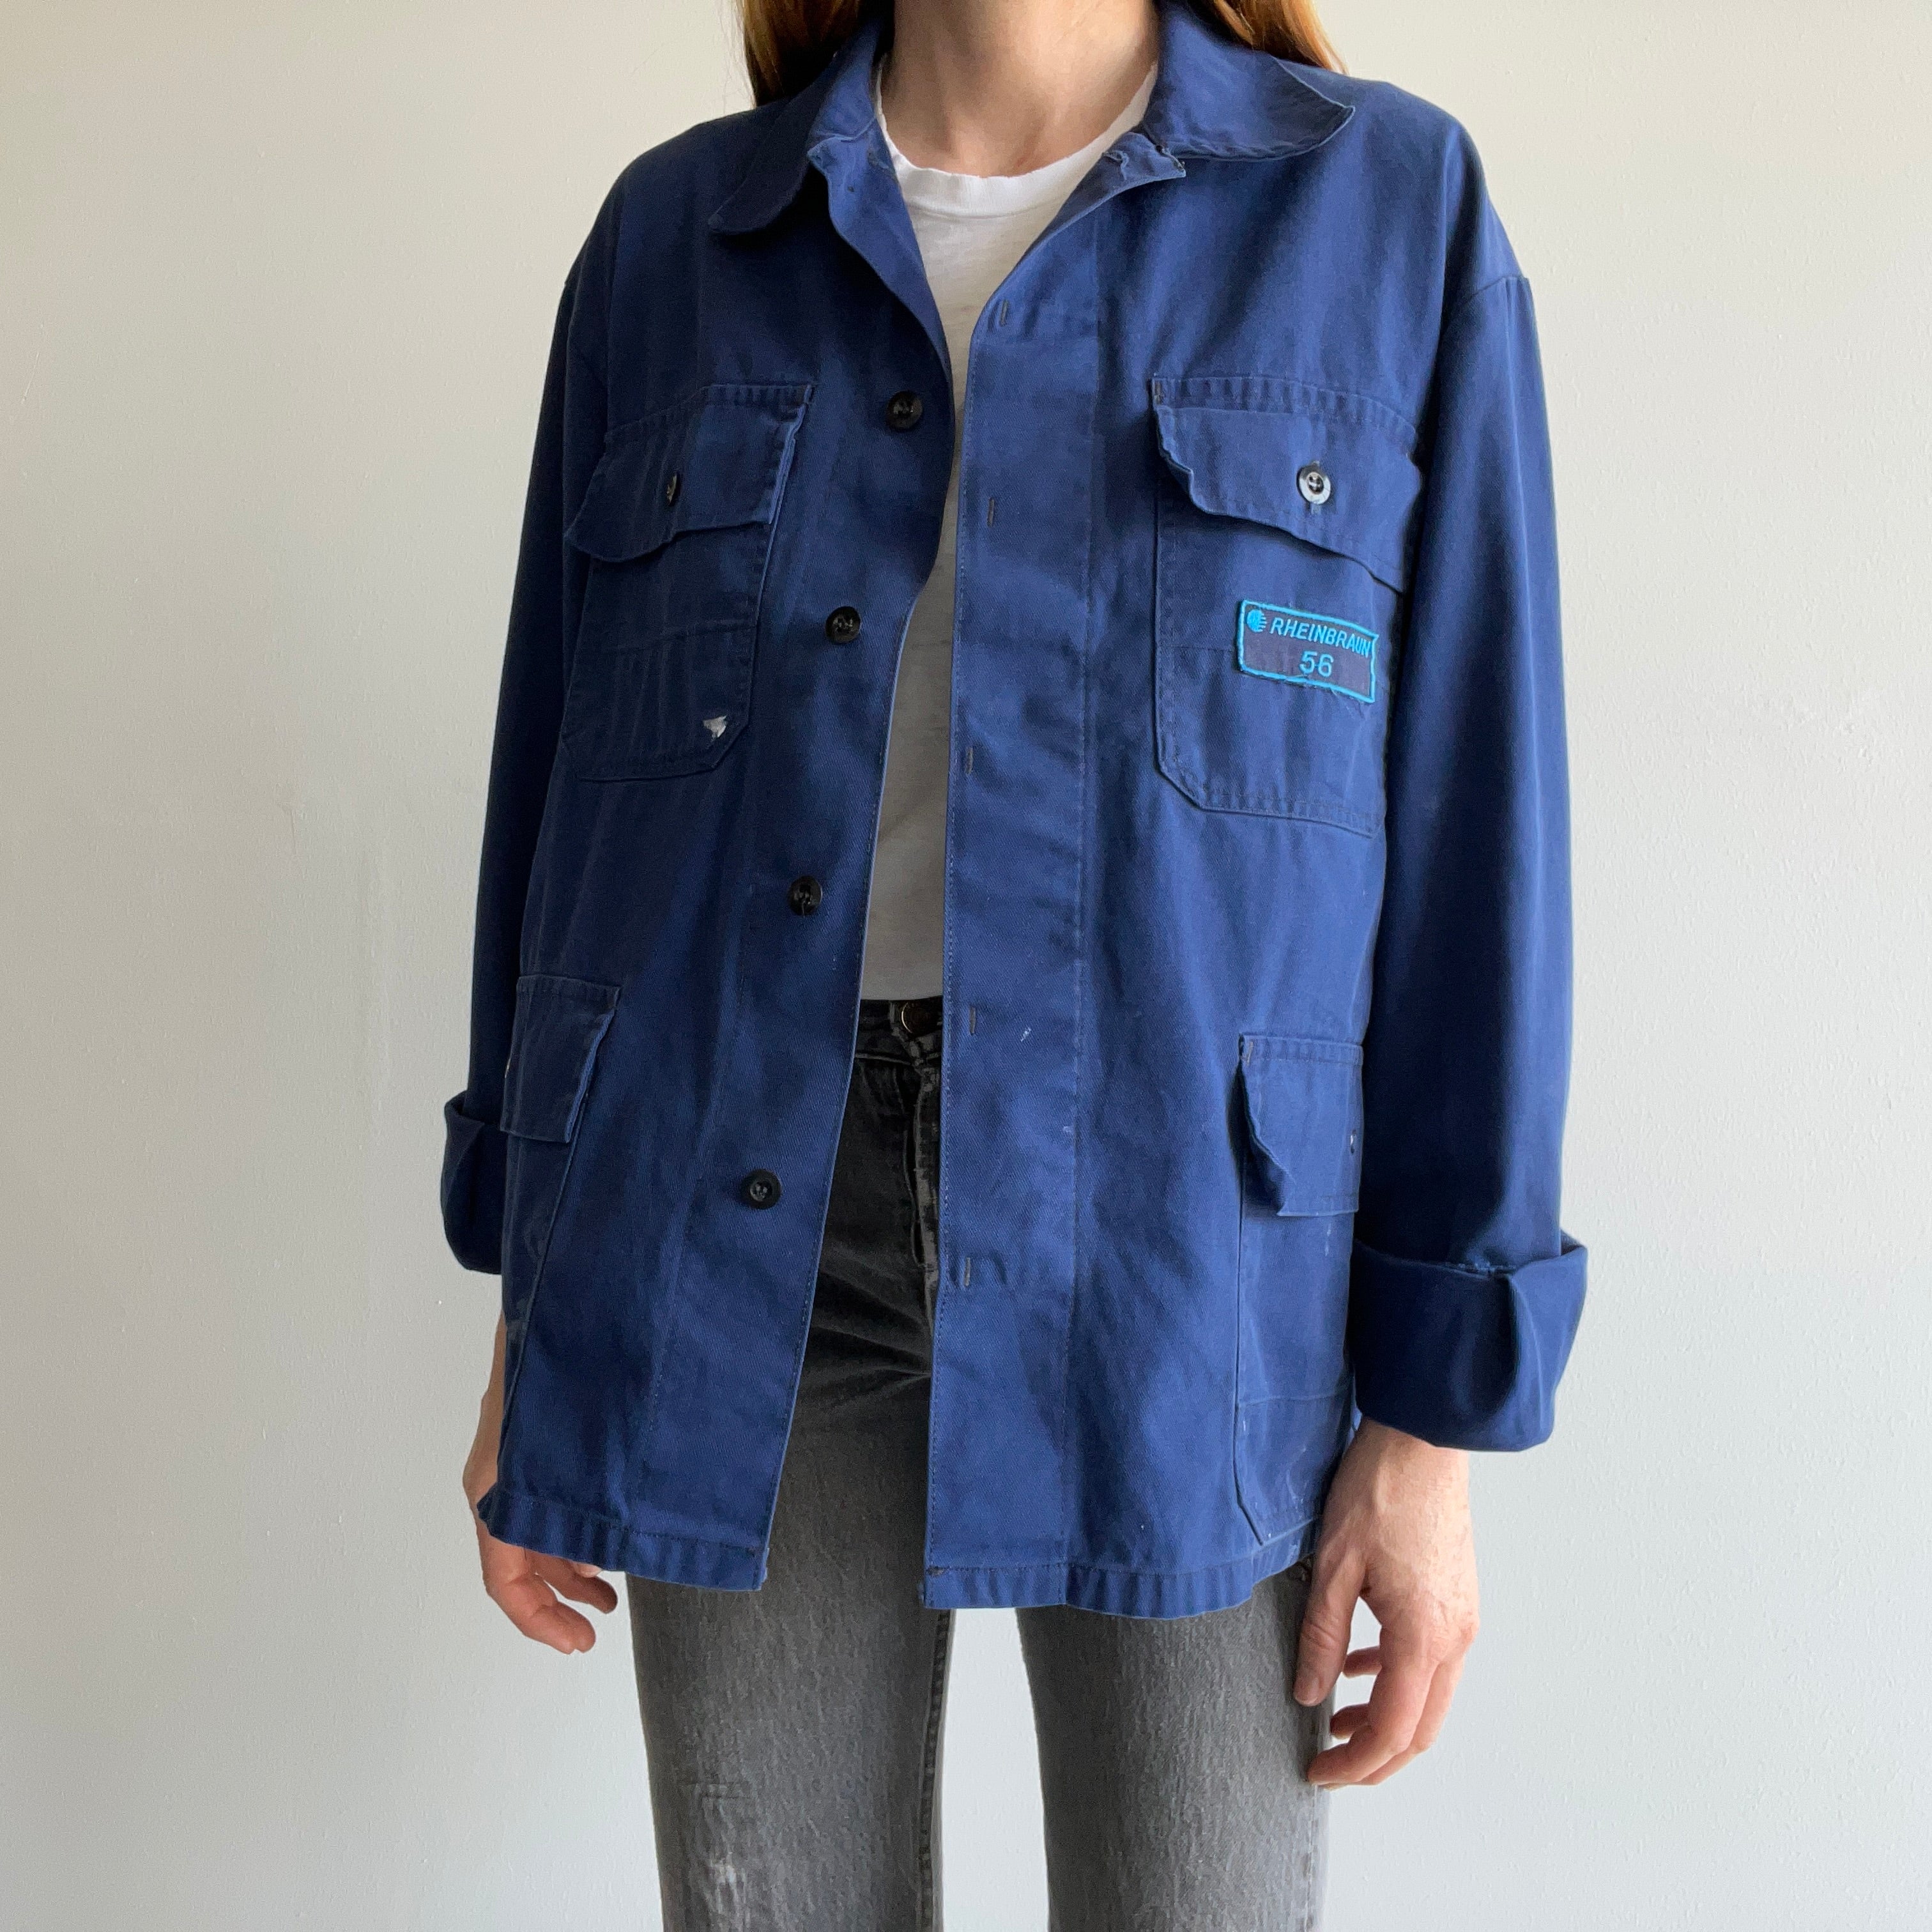 1990s Rheinbraun Button Chest Pocket Chore Coat with Paint Staining